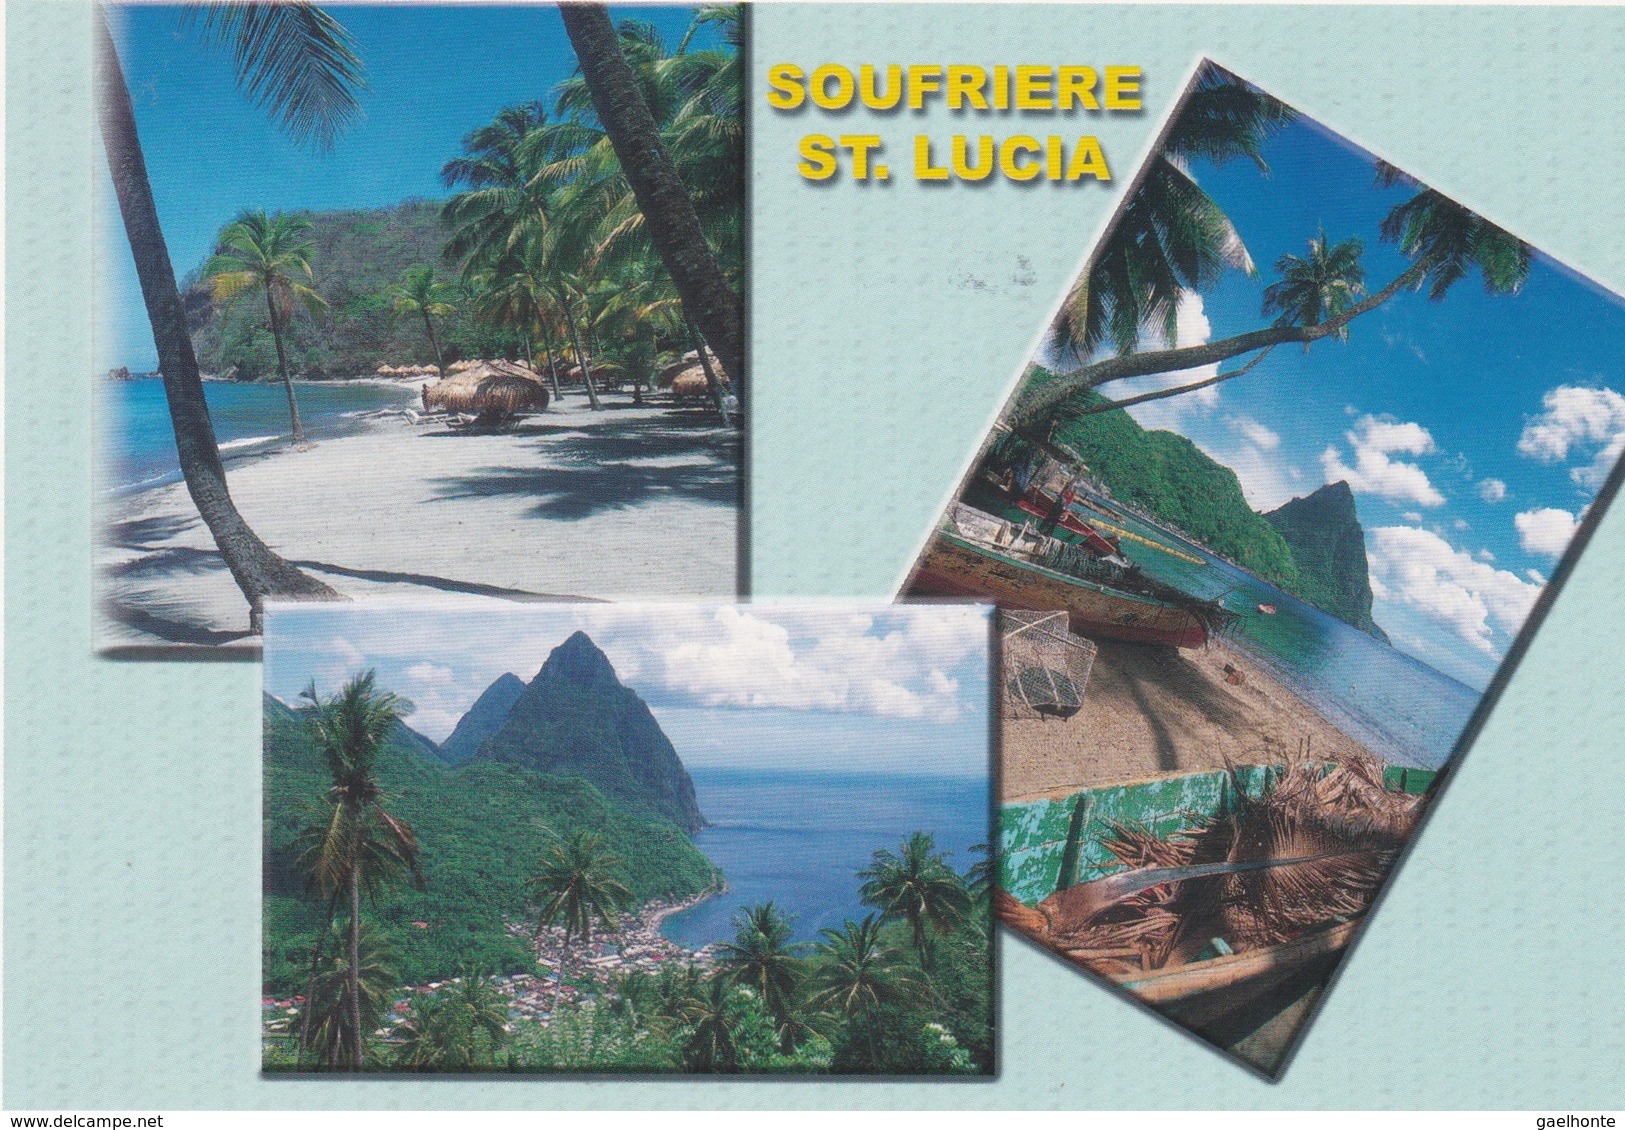 1213 SOUFRIERE - ST LUCIA - SCENERY INVITING YOU TO INTERACT WITH NATURE - GRANDE CARTE - Sainte-Lucie